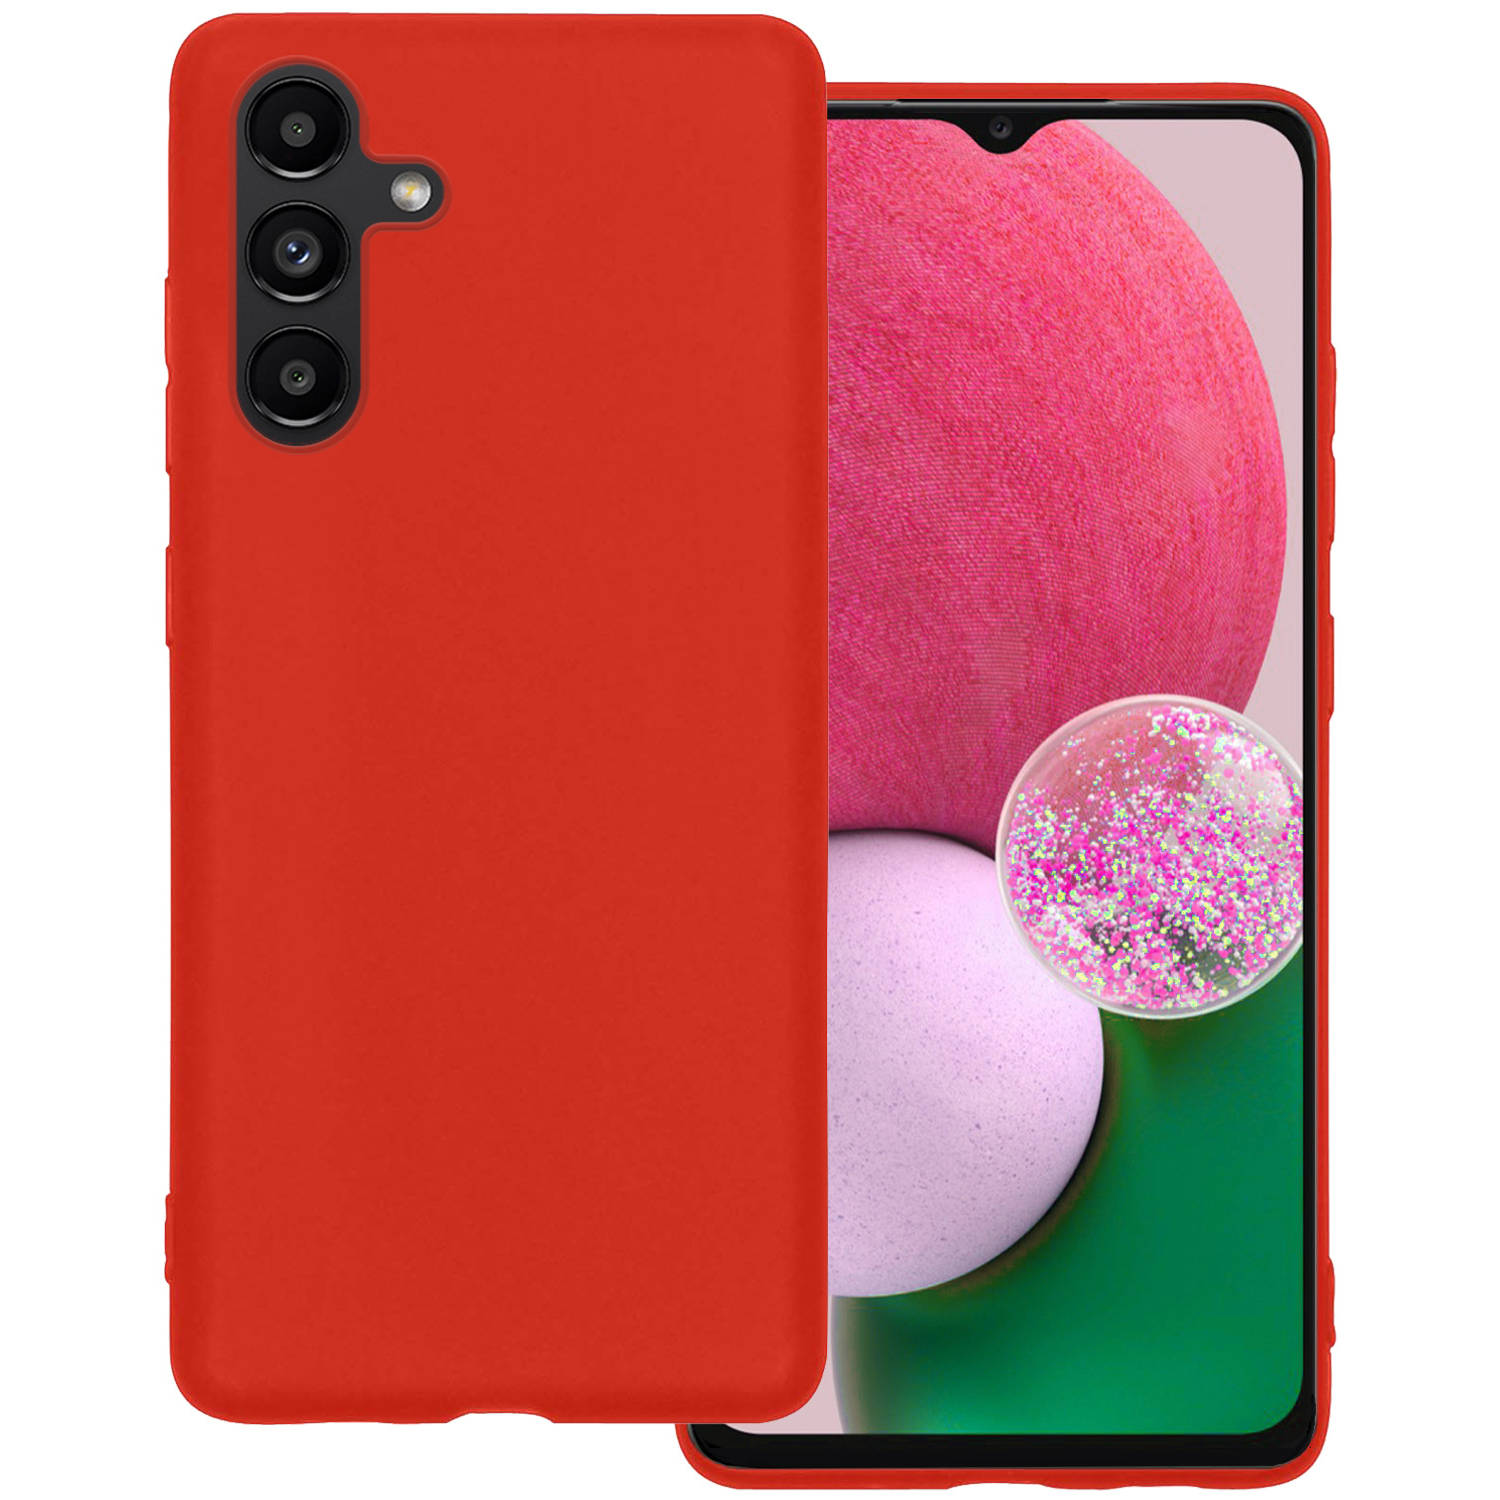 Basey Samsung Galaxy A13 5G Hoesje Siliconen Hoes Case Cover -Rood